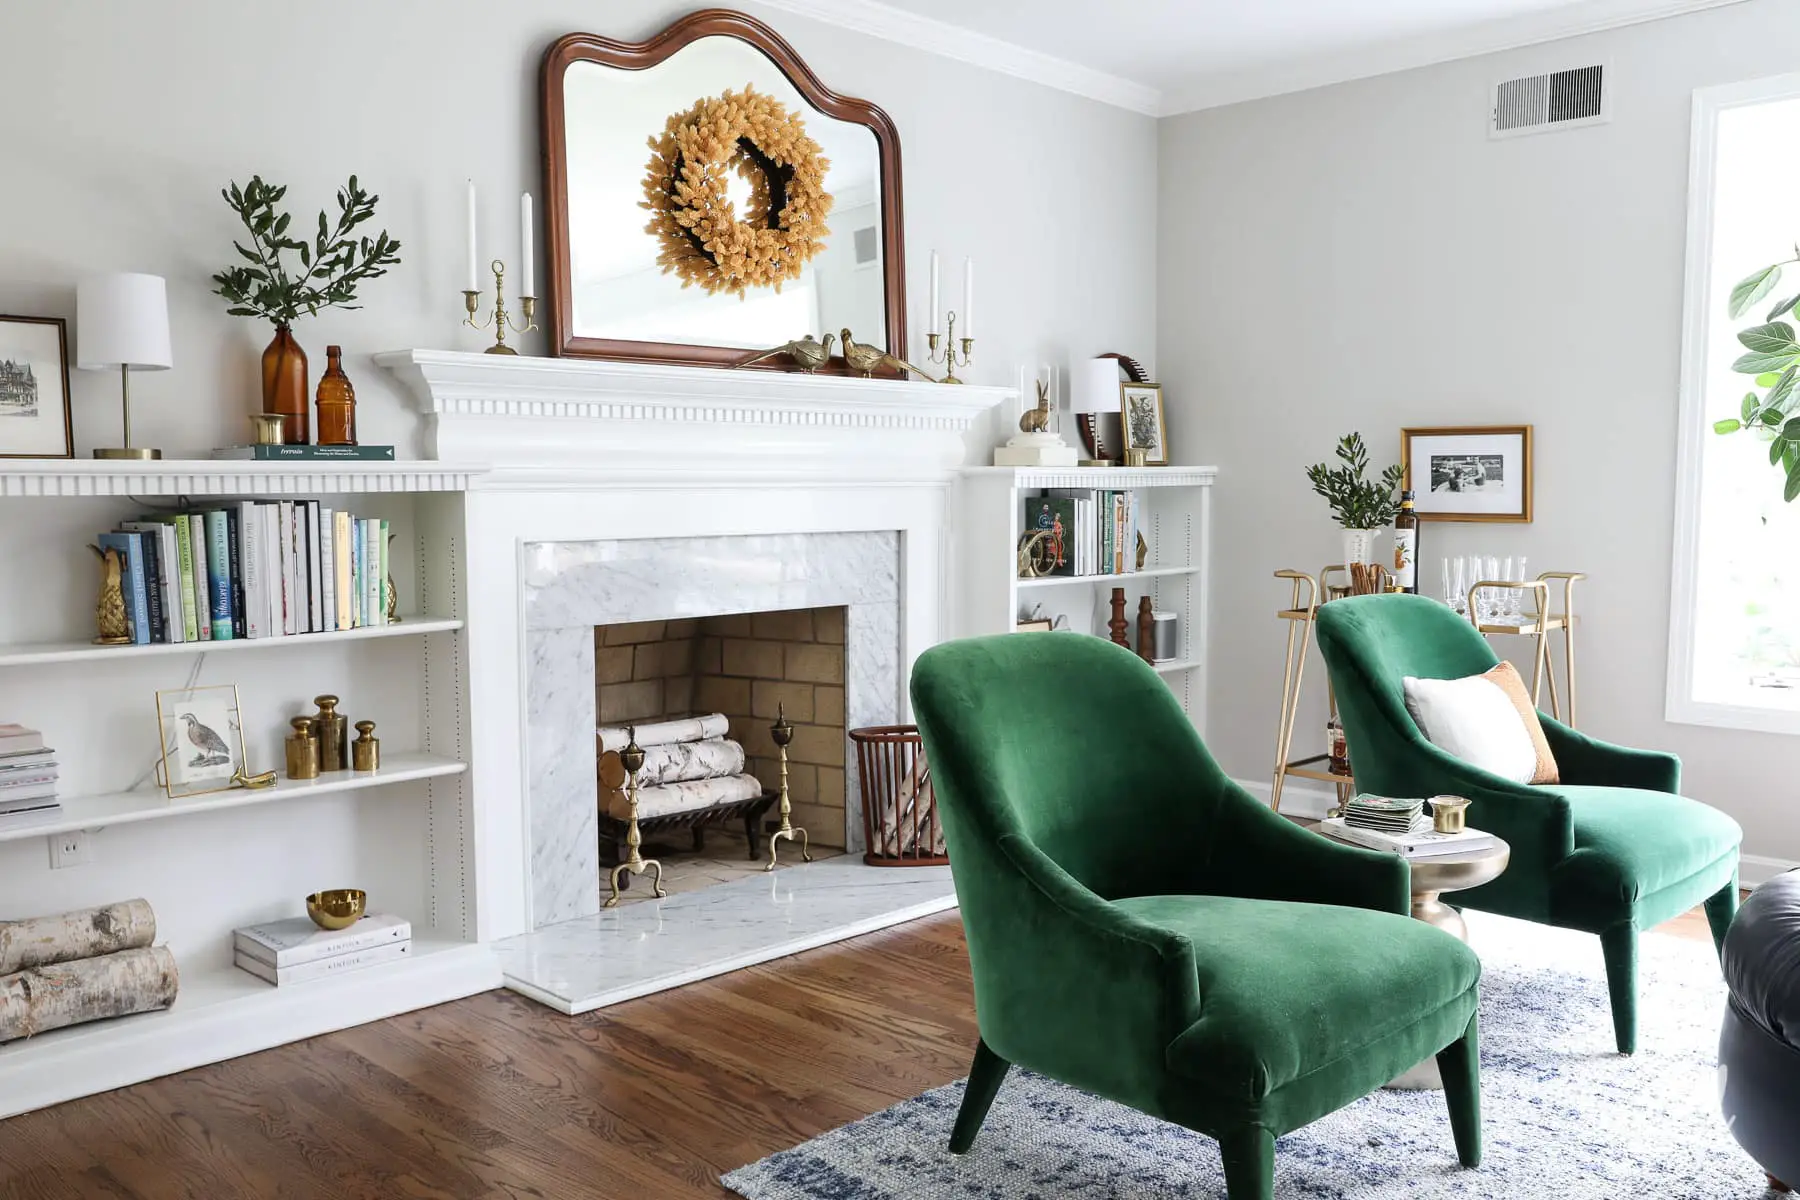 Top 9 Amazing Living Room Fall Decor Ideas For You!